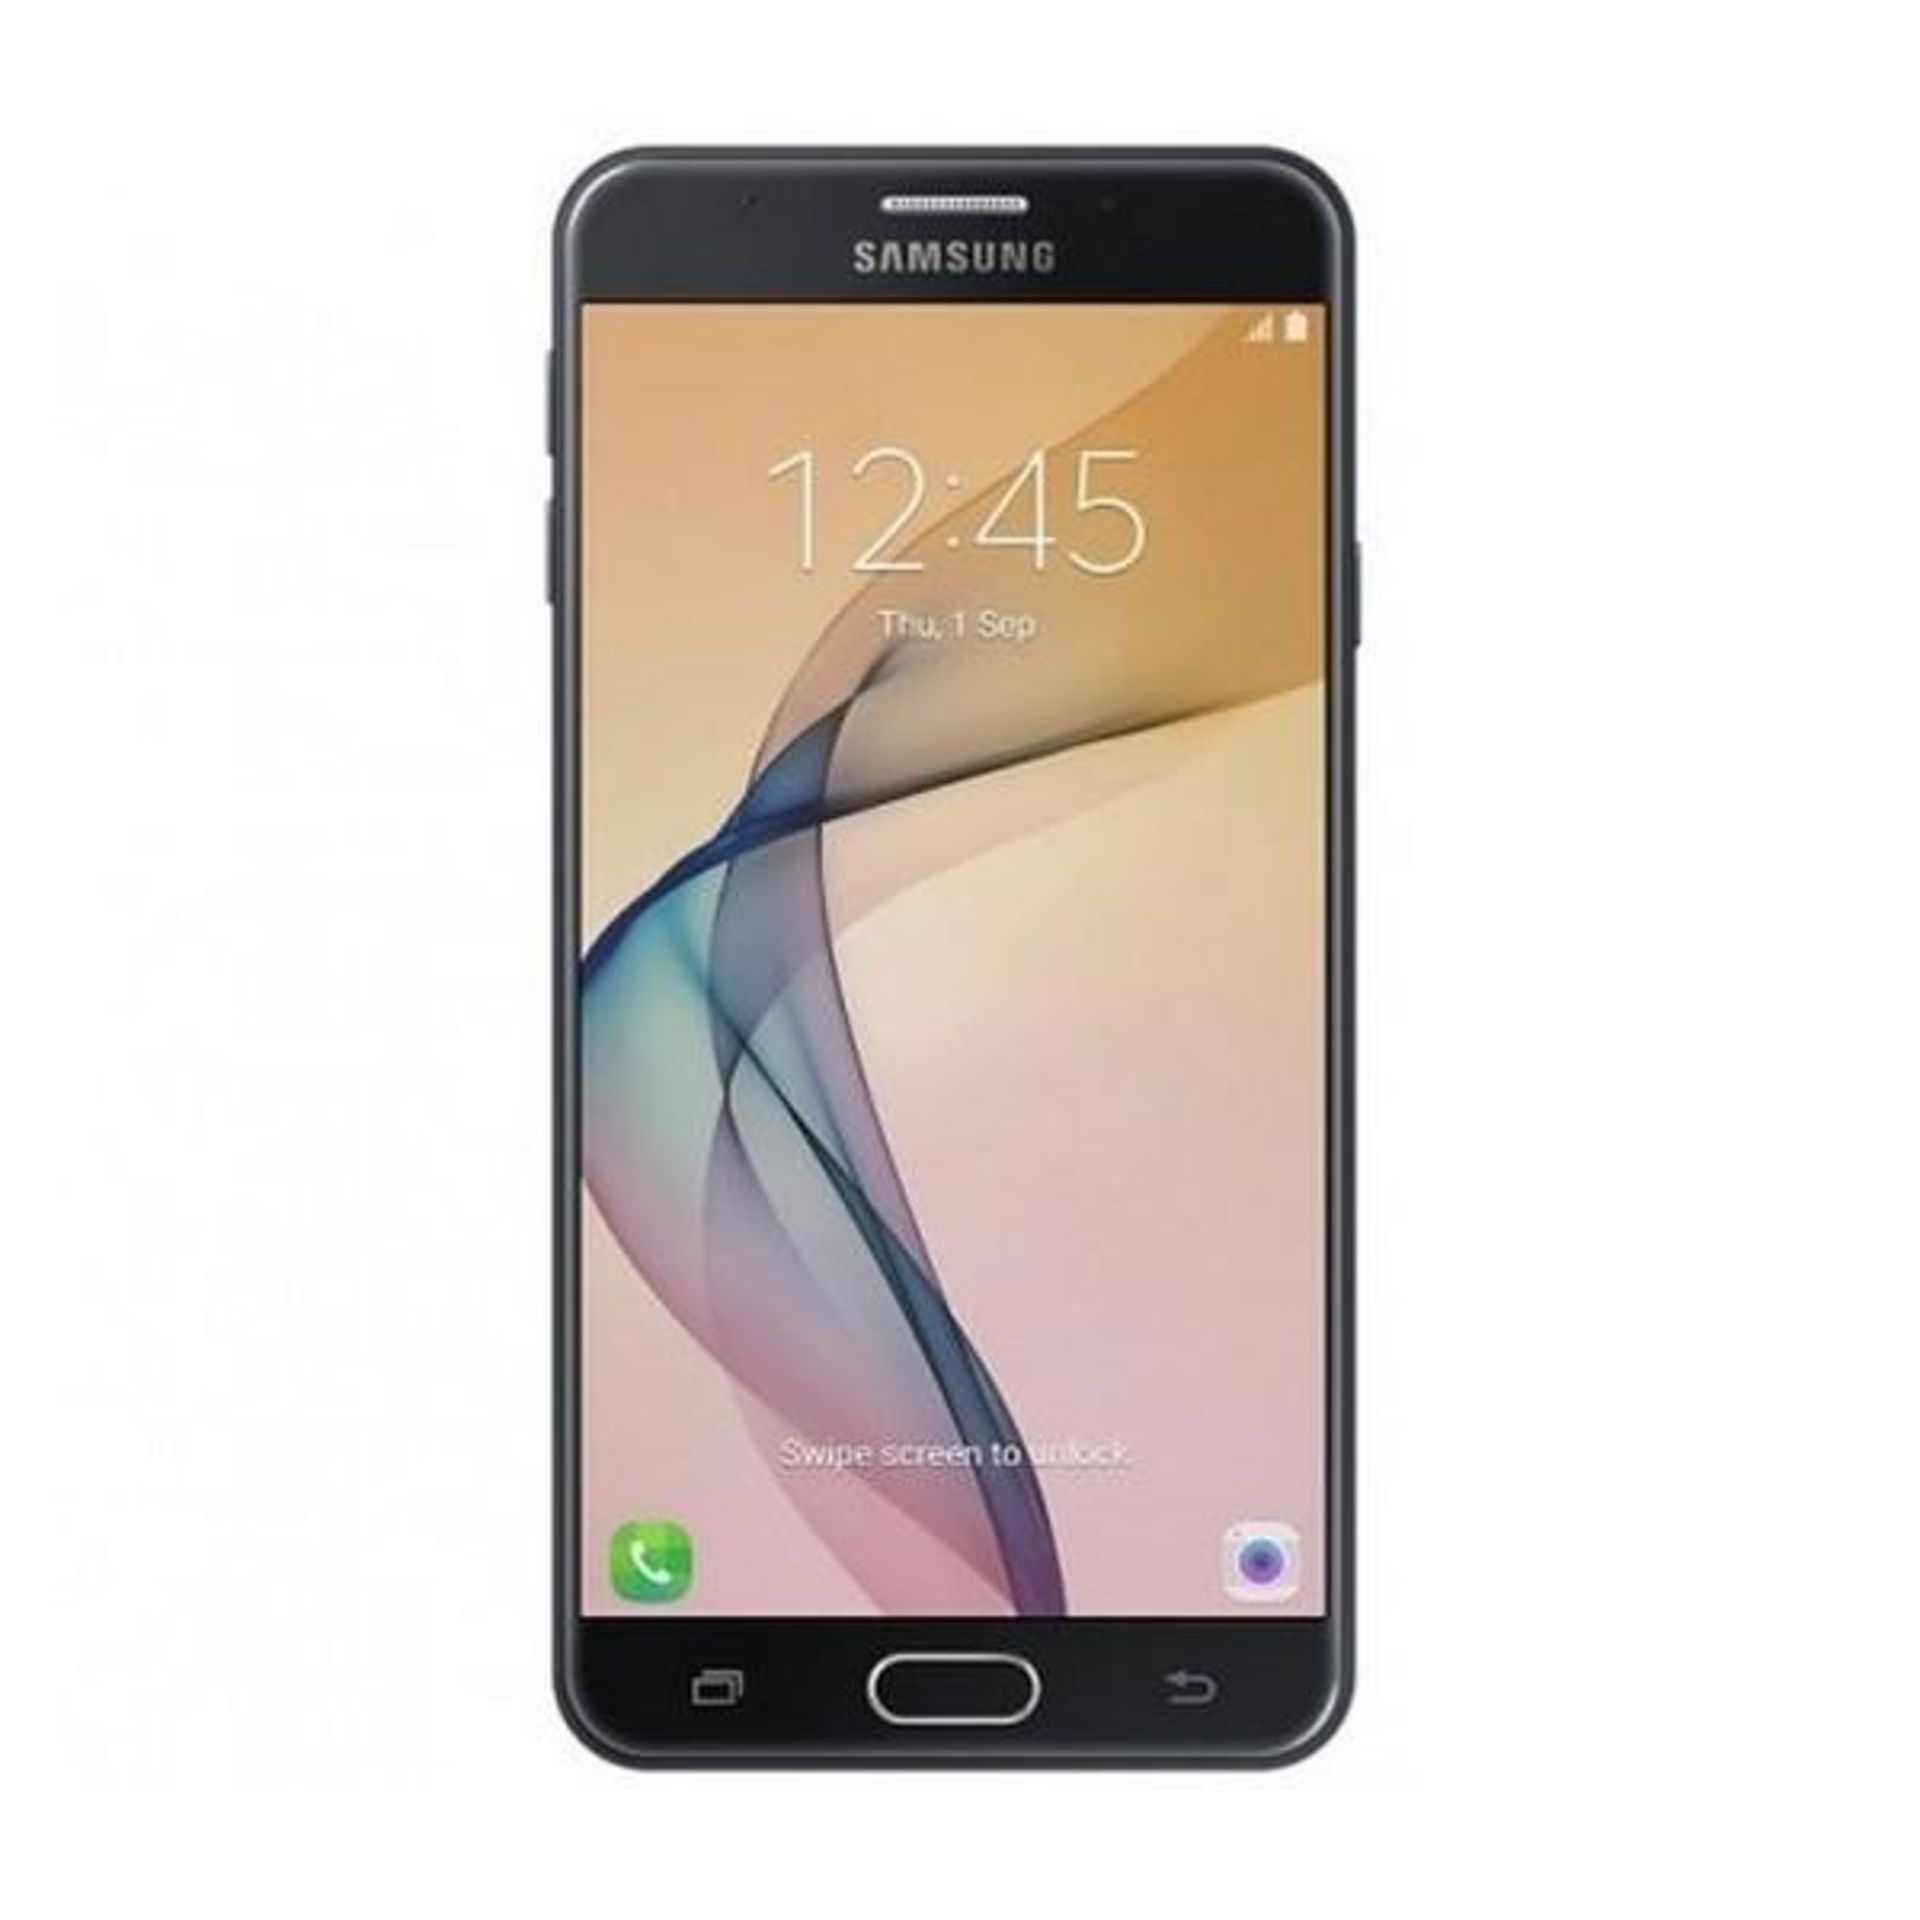 Grade A Samsung J5 Prime(G5700, 2016) Colours May Vary Item available approx 12 working days after